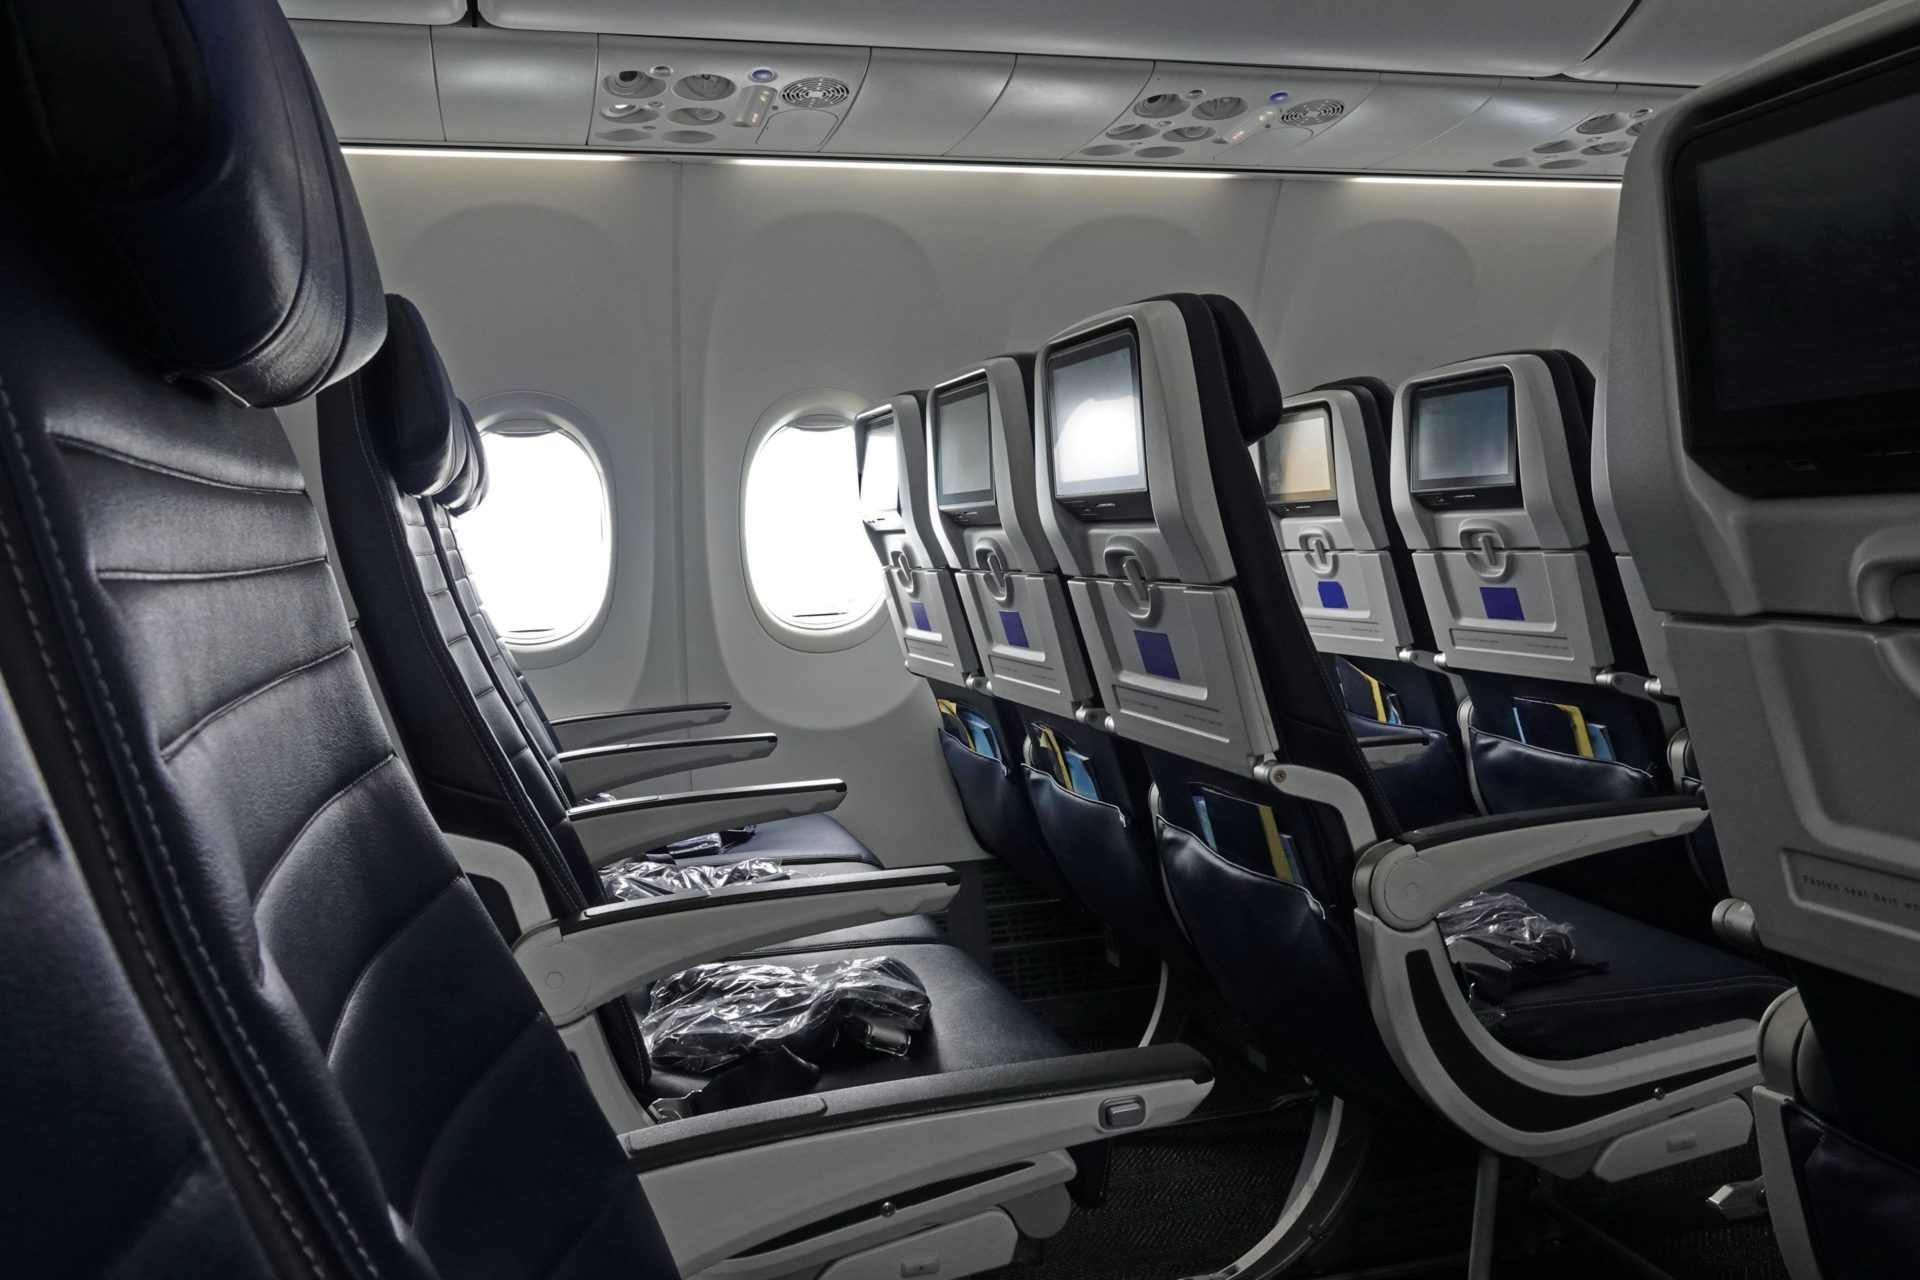 Empty rows of seats in economy class of a commercial airliner in June 2022